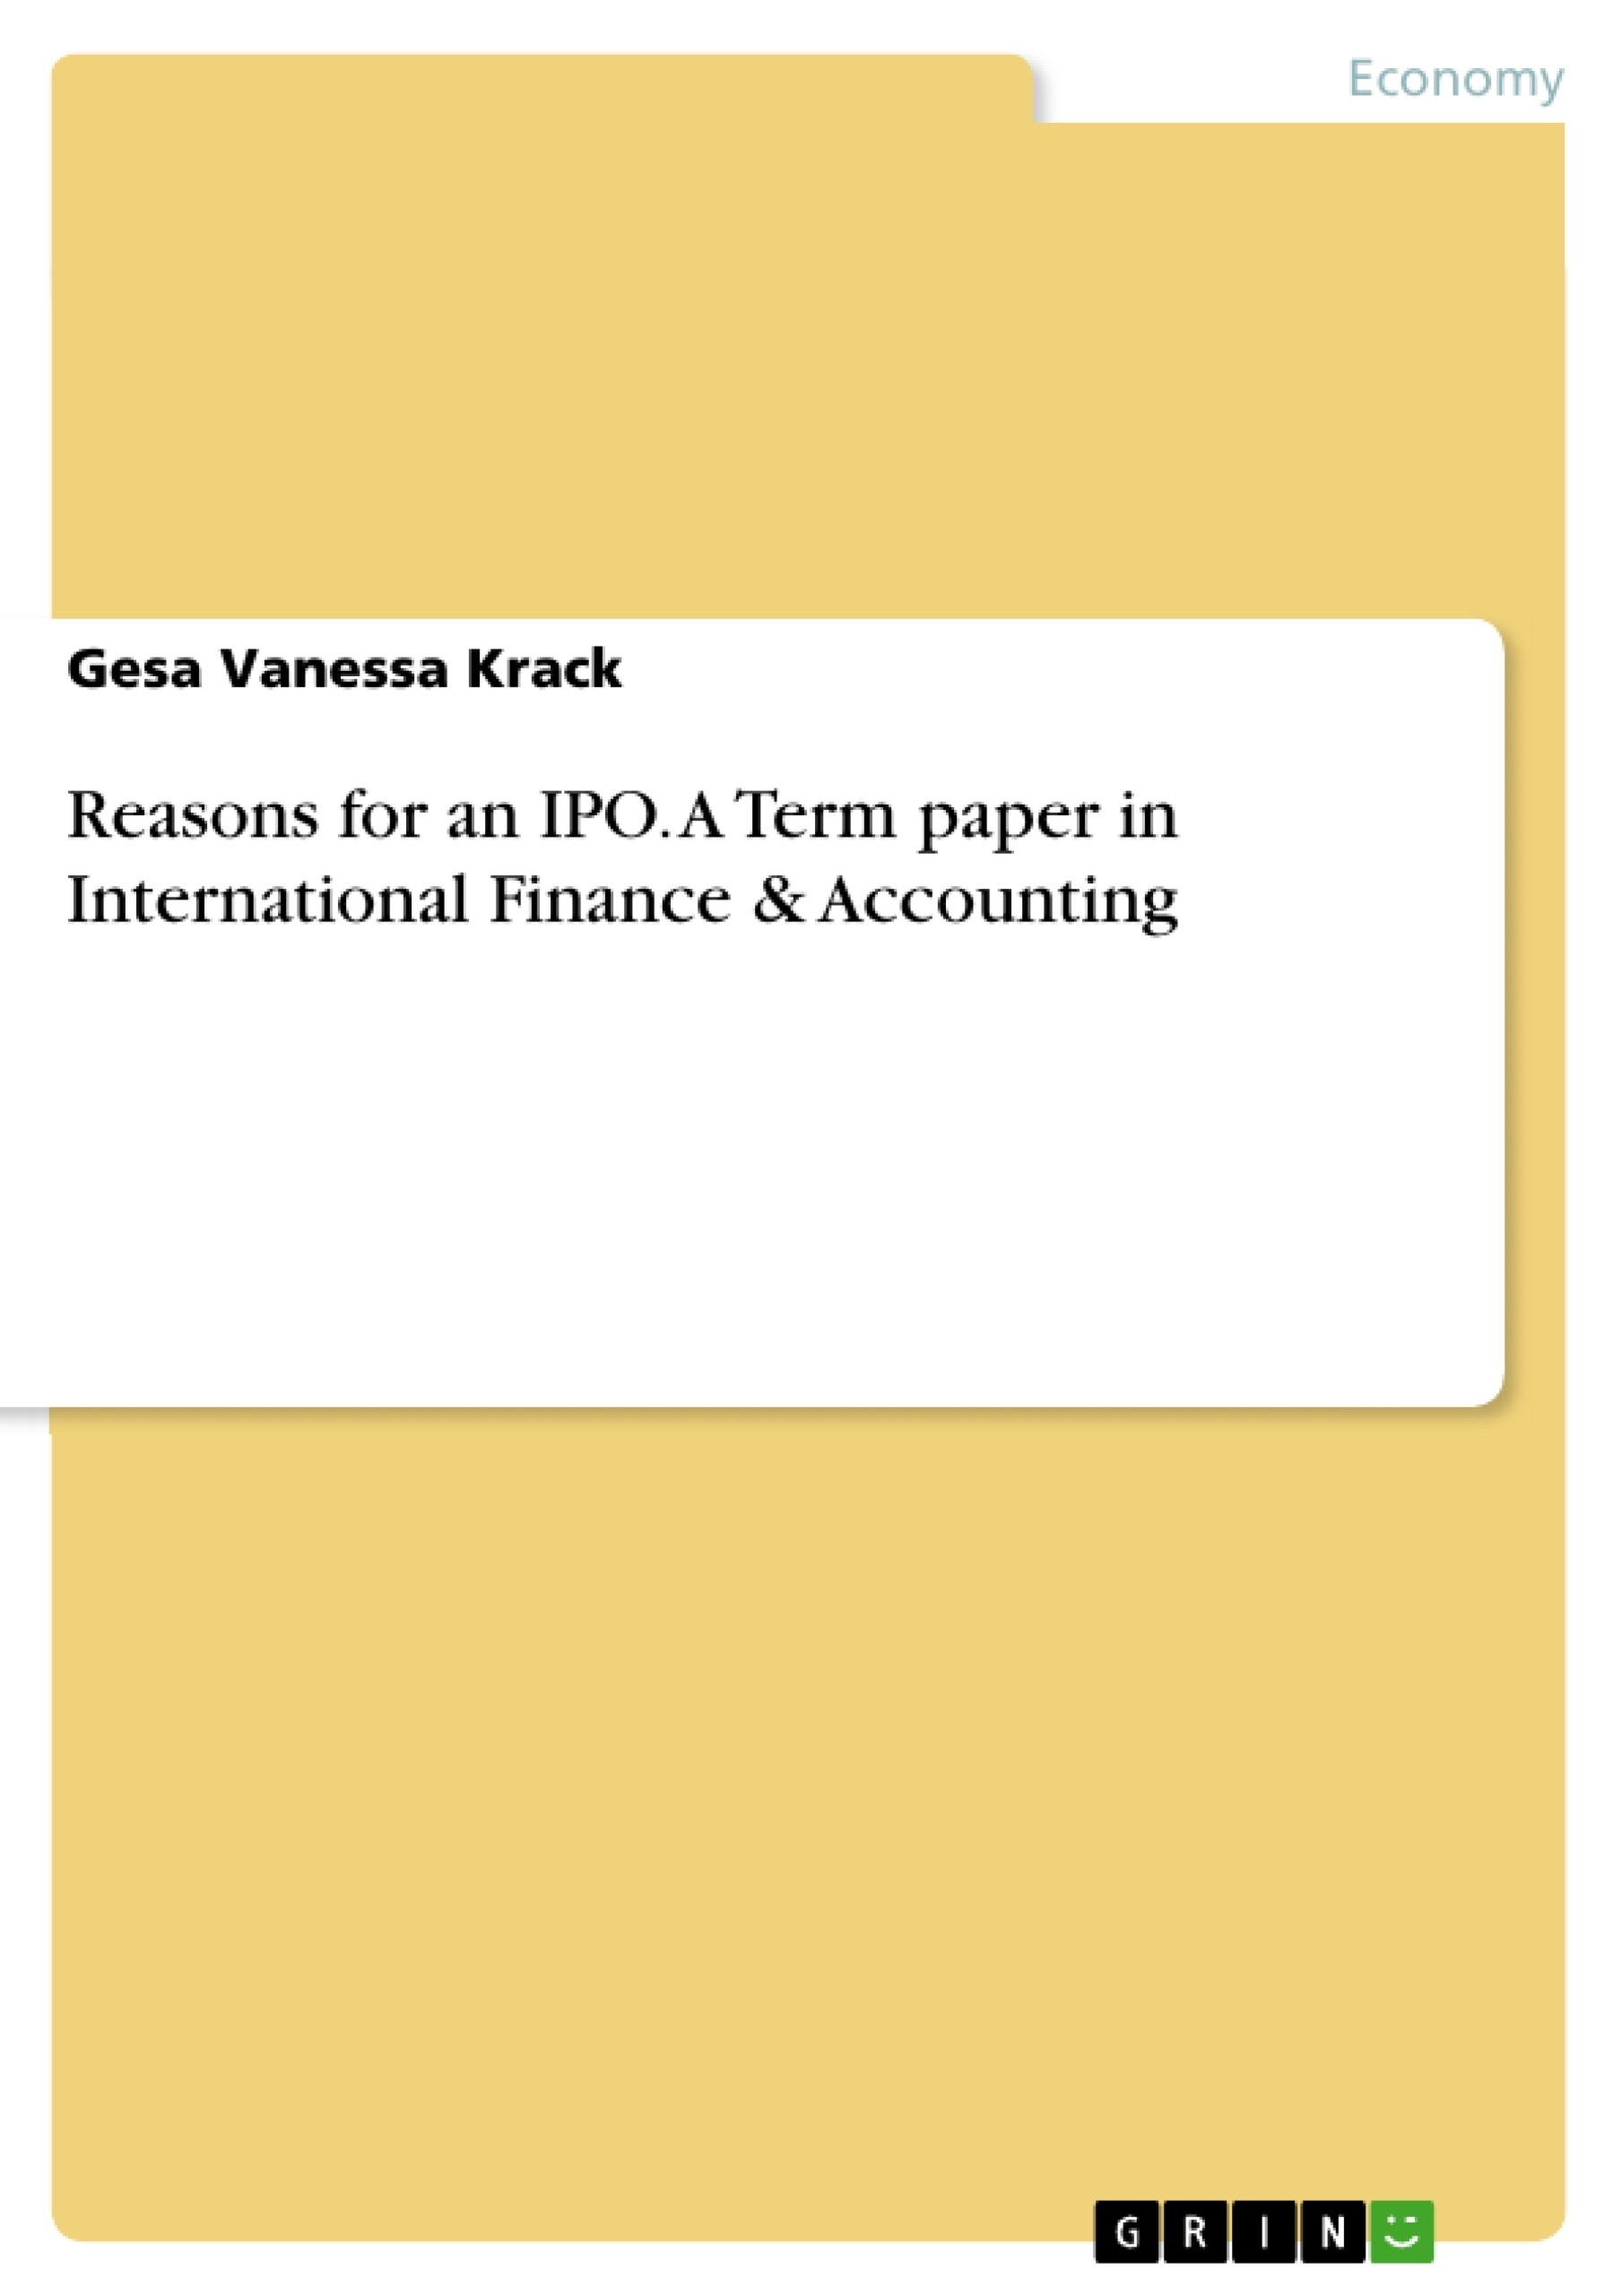 Title: Reasons for an IPO. A Term paper in International Finance & Accounting